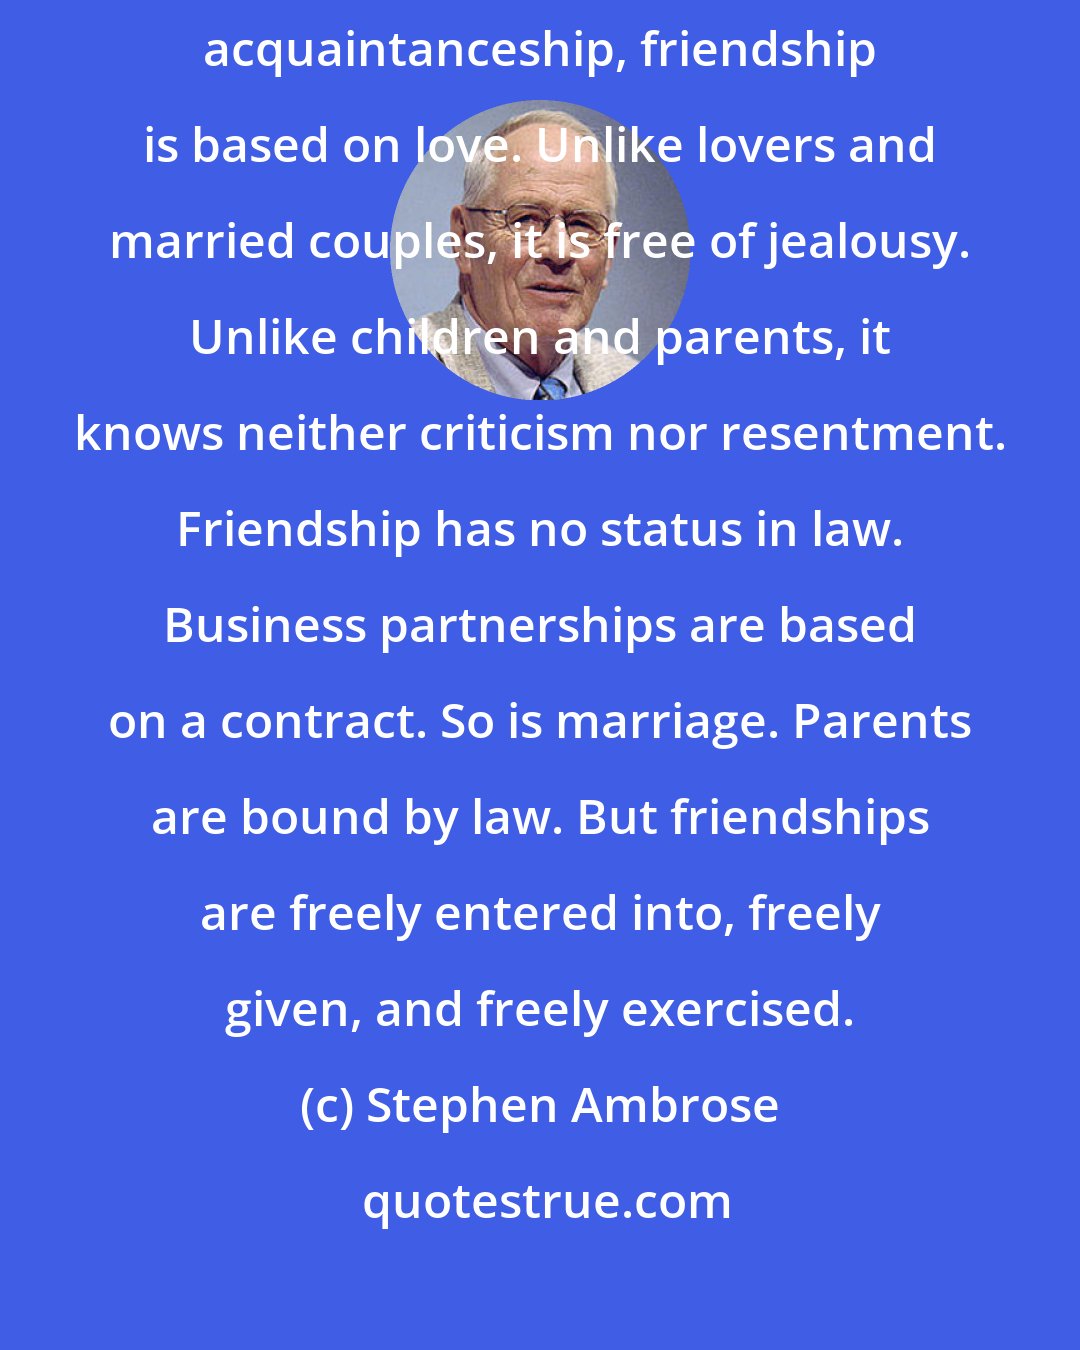 Stephen Ambrose: Friendships are different from all other relationships. Unlike acquaintanceship, friendship is based on love. Unlike lovers and married couples, it is free of jealousy. Unlike children and parents, it knows neither criticism nor resentment. Friendship has no status in law. Business partnerships are based on a contract. So is marriage. Parents are bound by law. But friendships are freely entered into, freely given, and freely exercised.